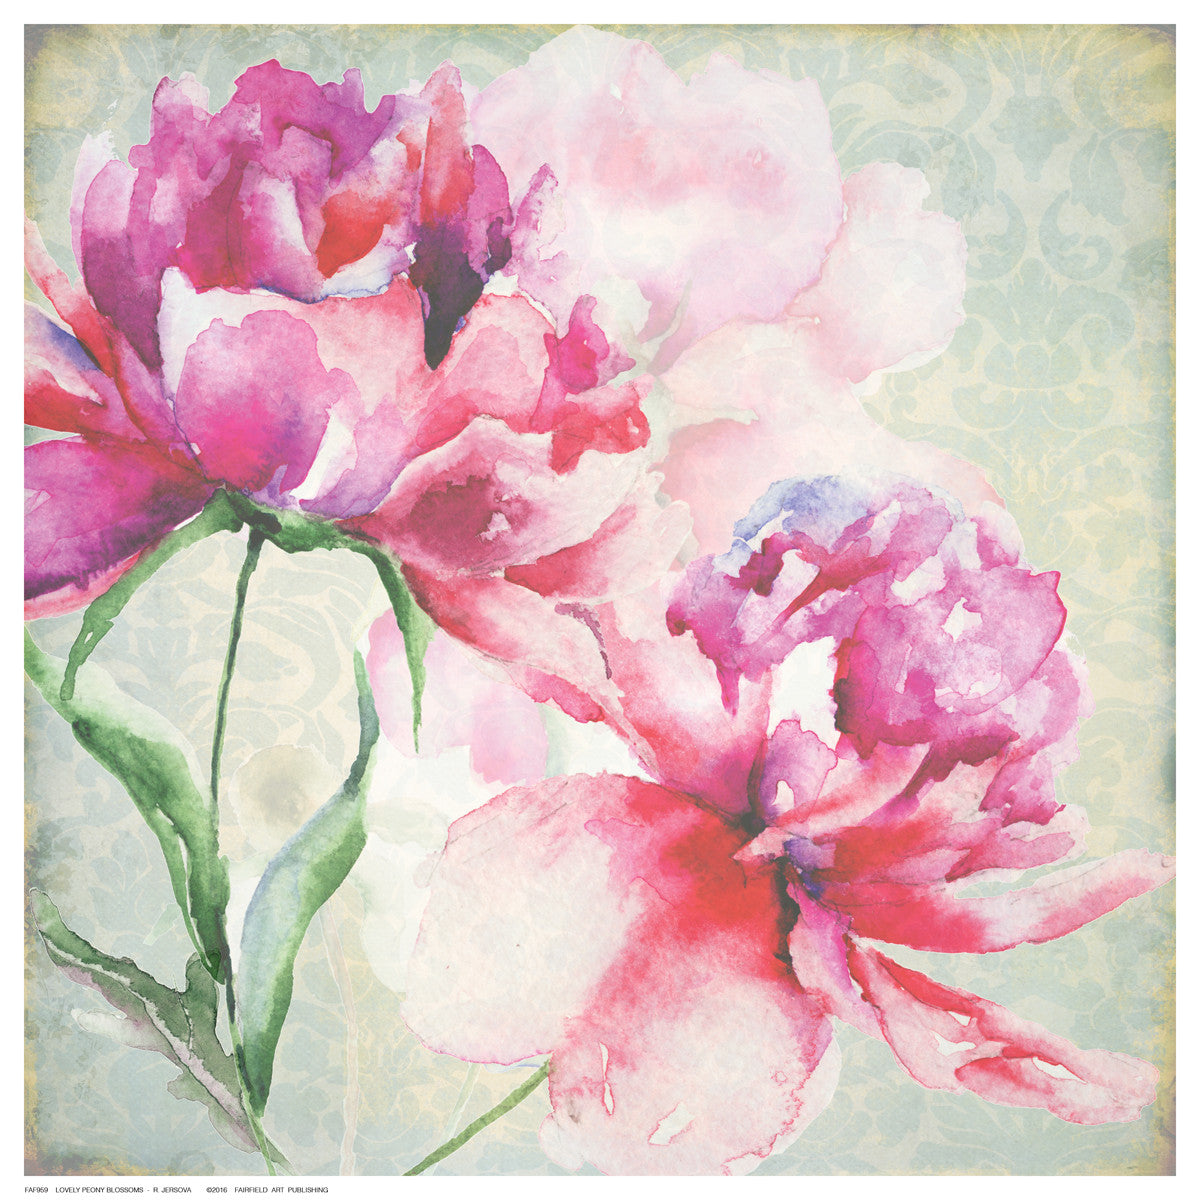 Lovely Peony Blossoms by R. Jersova - FairField Art Publishing